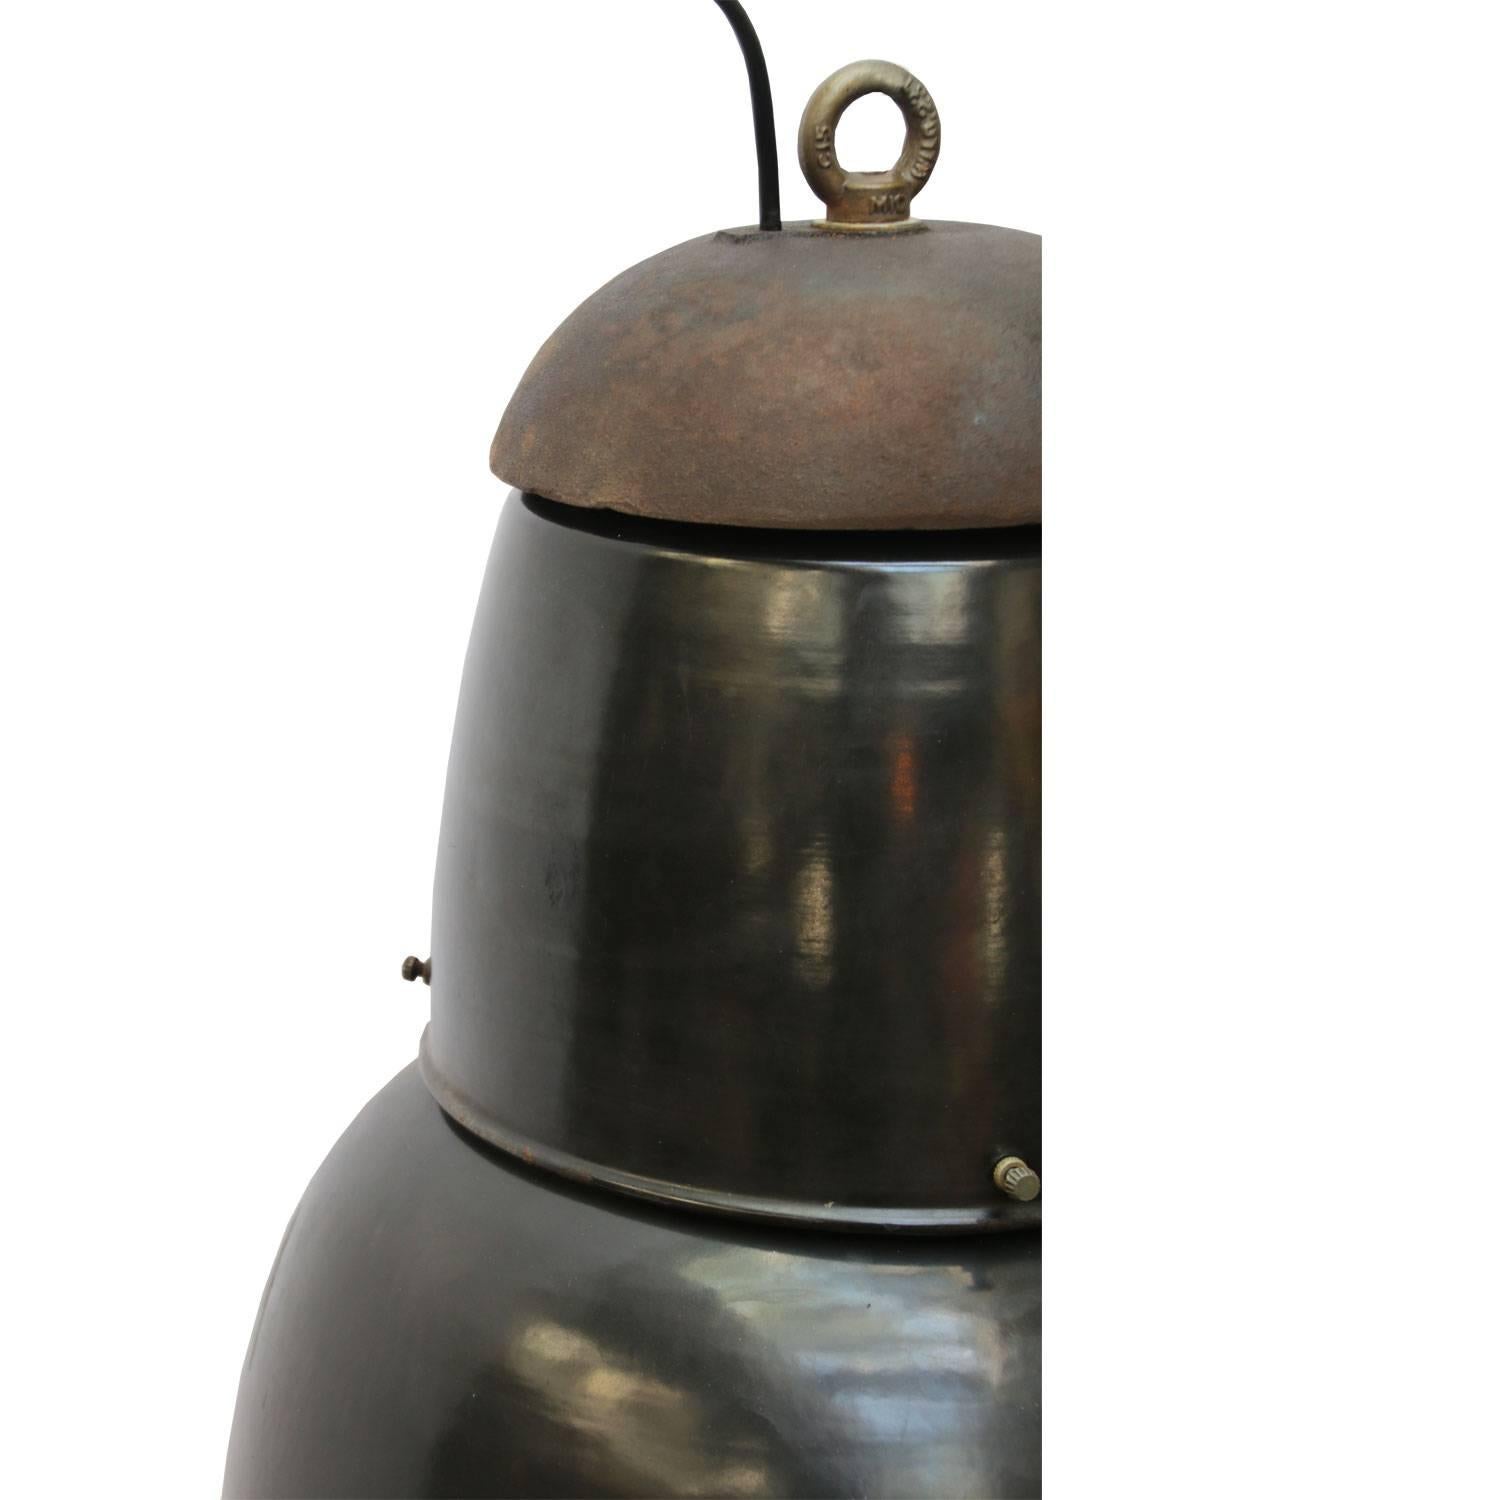 Black enamel Industrial pendant. Cast iron top. White interior.

Weight: 7.0 kg / 15.4 lb

All lamps have been made suitable by international standards for incandescent light bulbs, energy-efficient and LED bulbs. E26/E27 bulb holders and new wiring